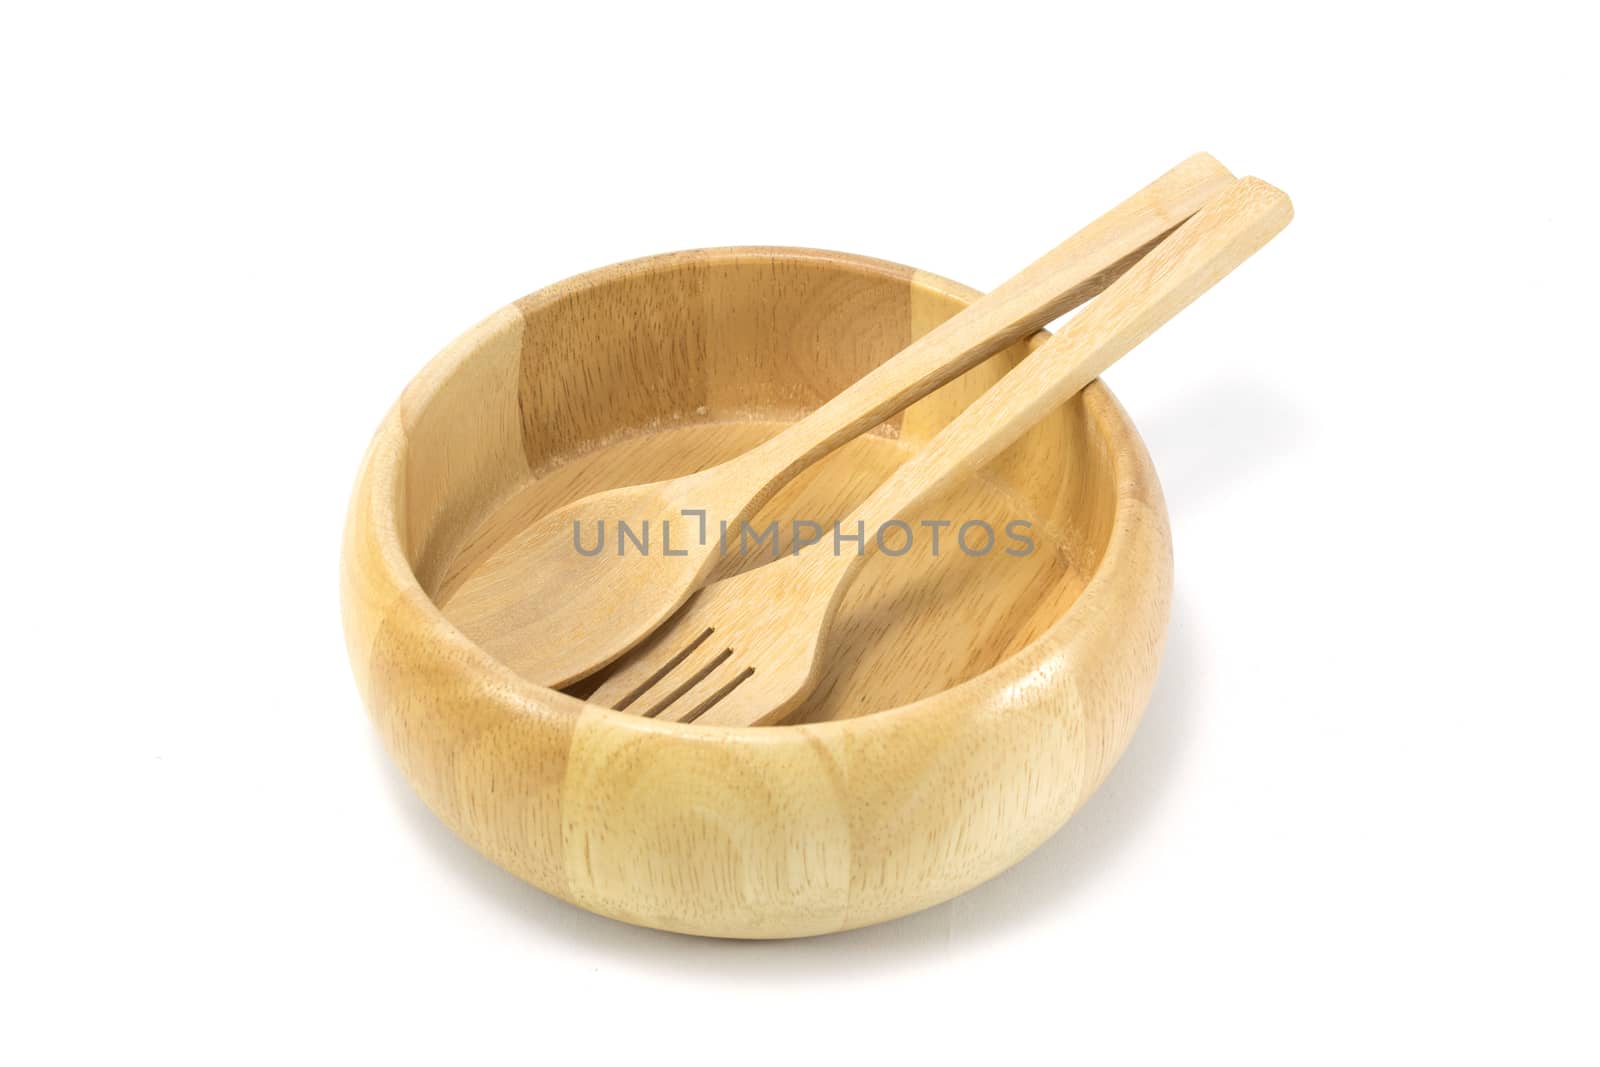 Wooden bowl with white background.